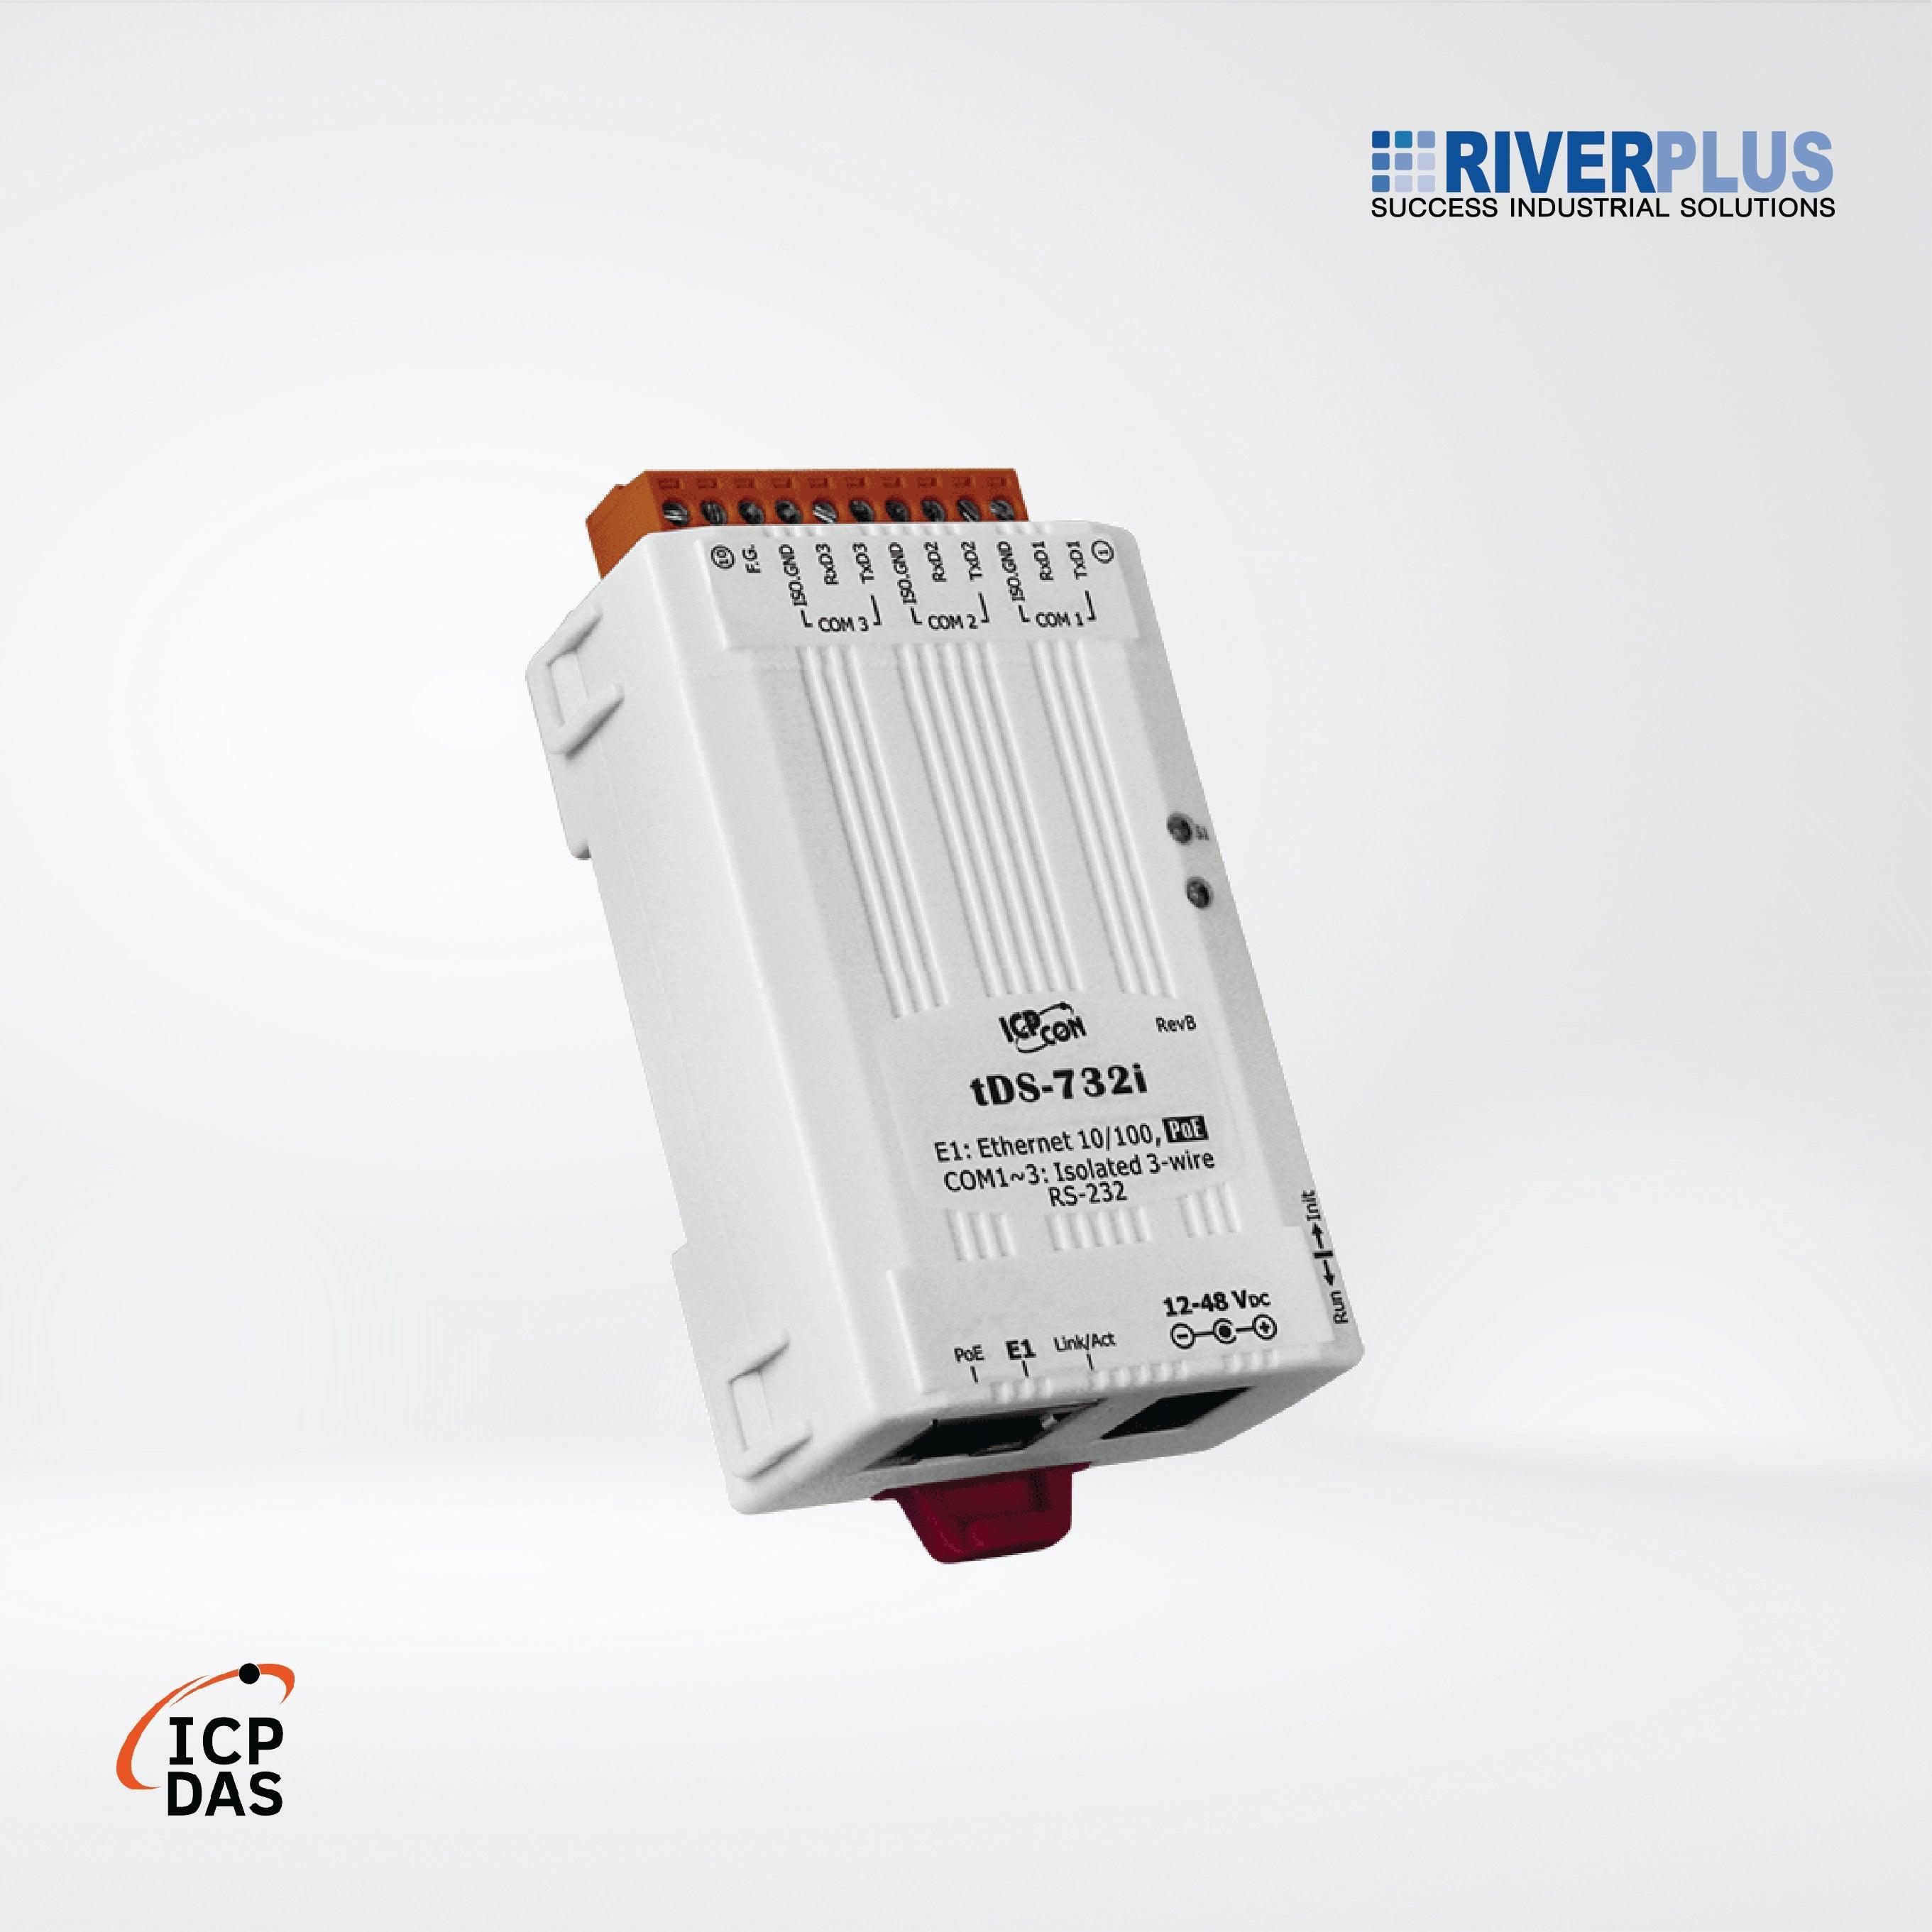 tDS-732i Tiny (3x RS-232) Serial-to-Ethernet Device Server - Riverplus